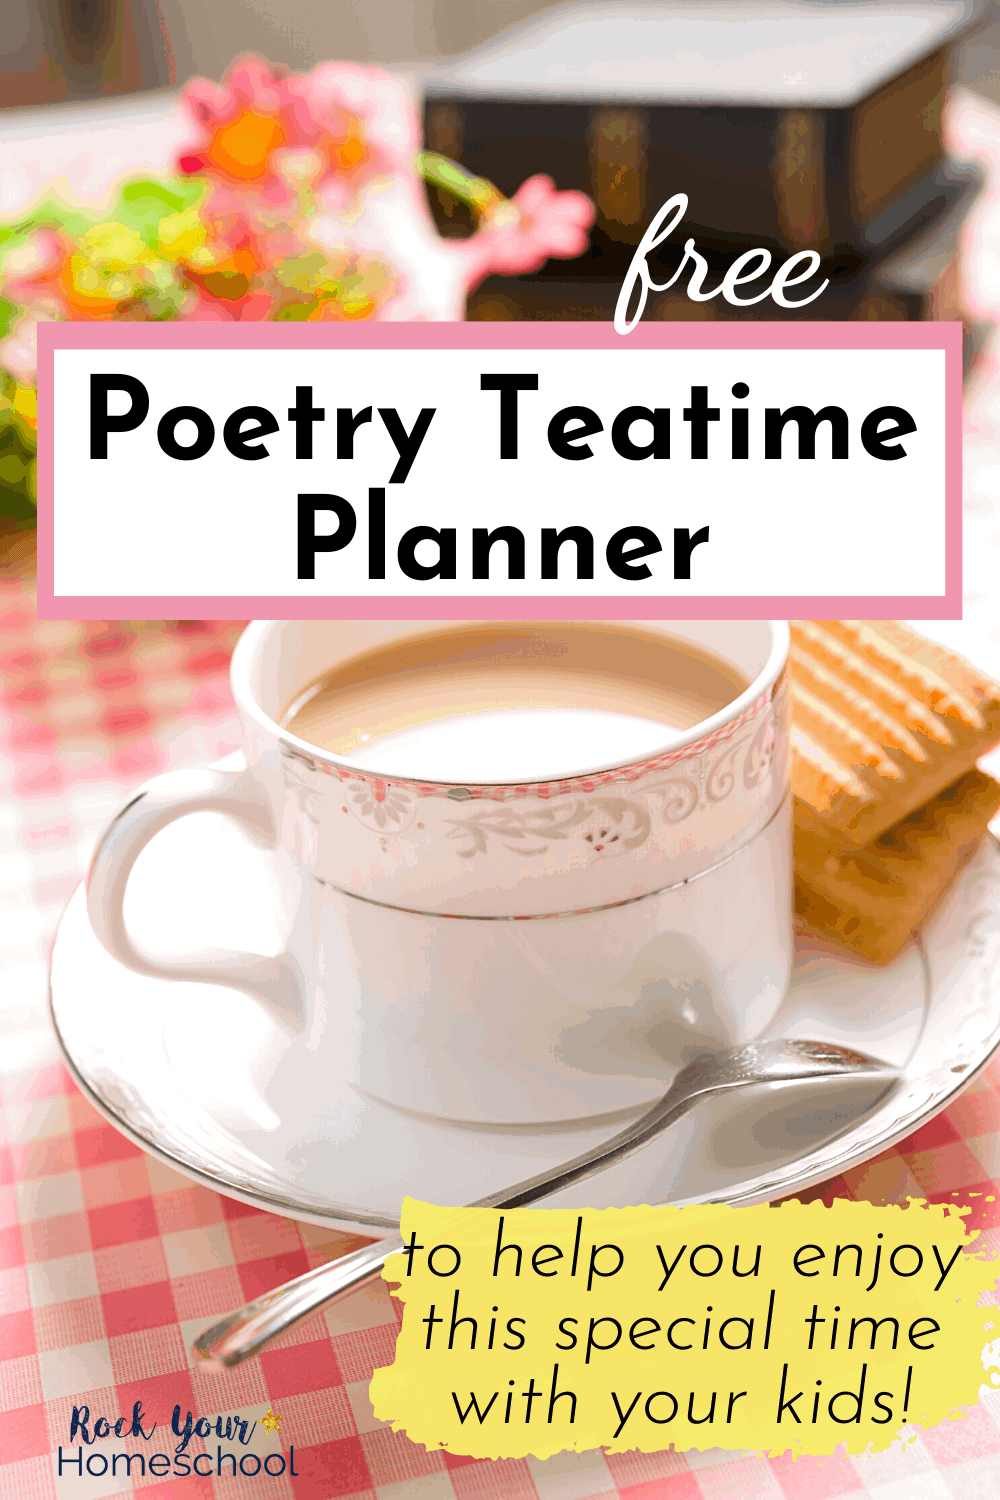 Free Poetry Teatime Planner to Enjoy the Celebration with Kids